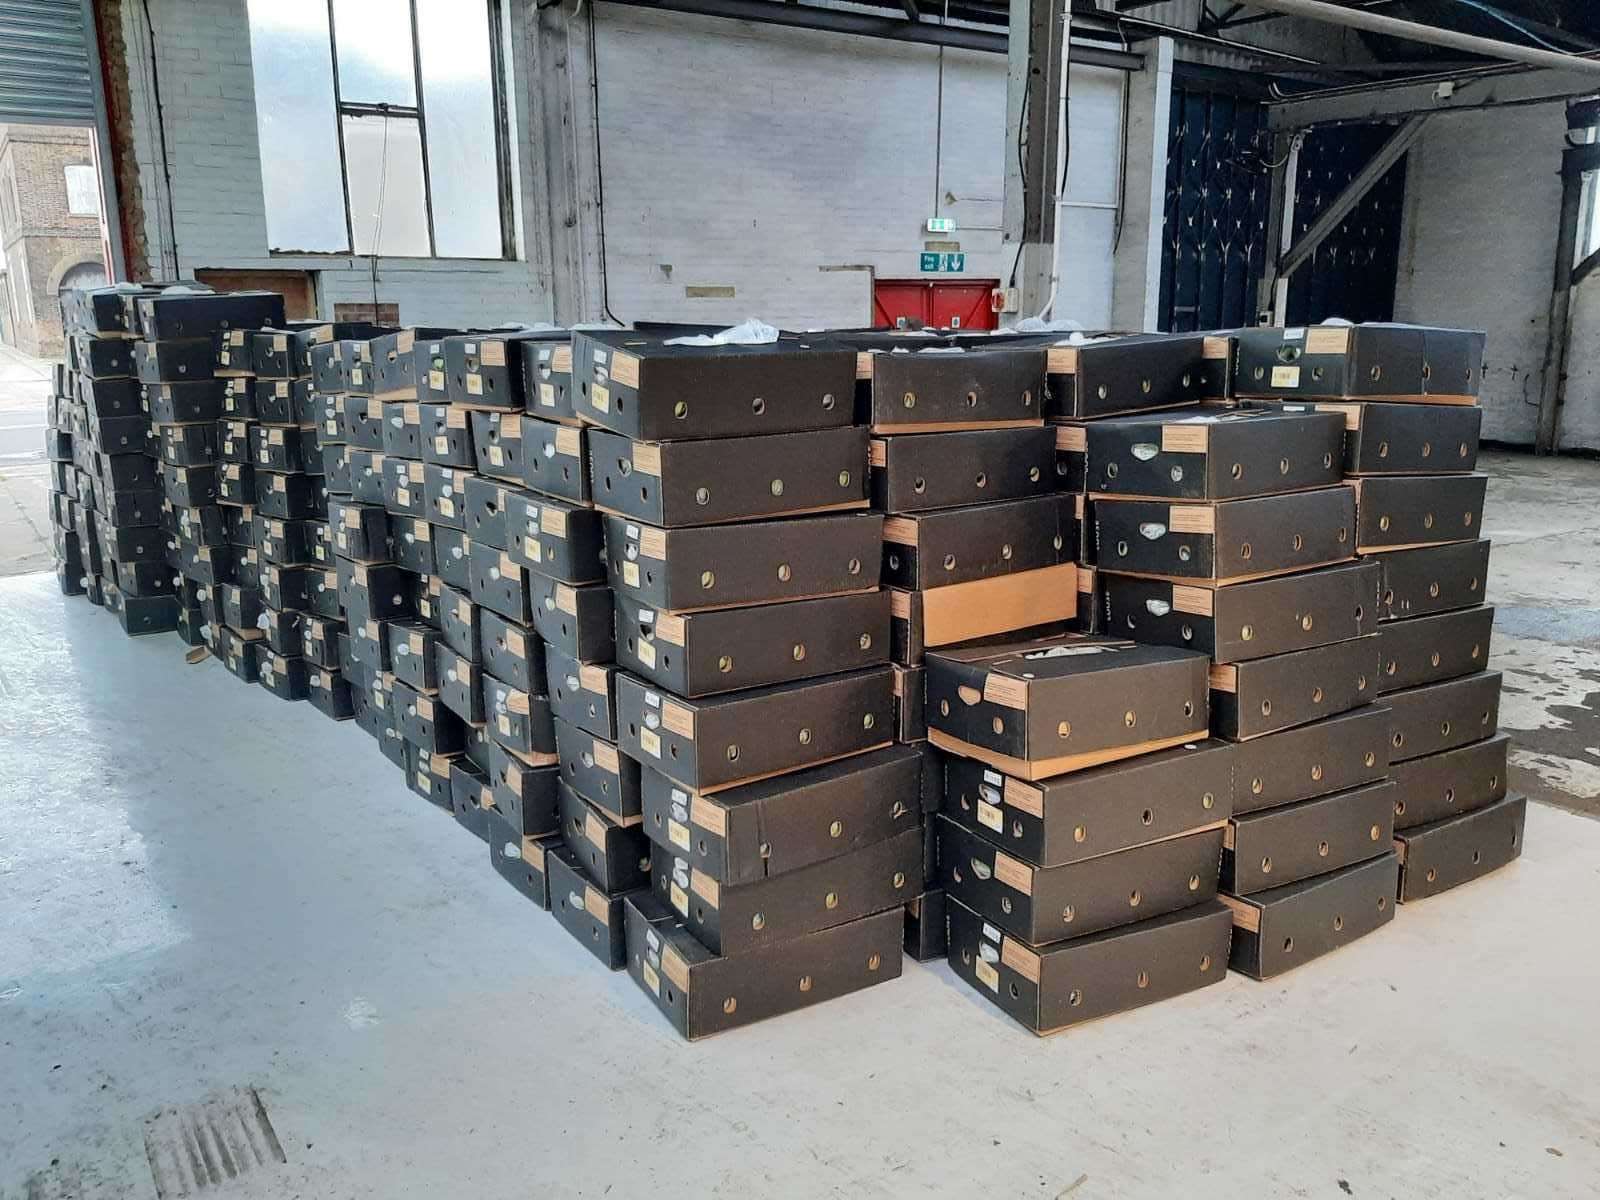 1.2 tonnes of cocaine was found in a banana boat in Sheerness Docks during an early morning armed police raid. It is said to have a street value of £90 million. Picture: National Crime Agency